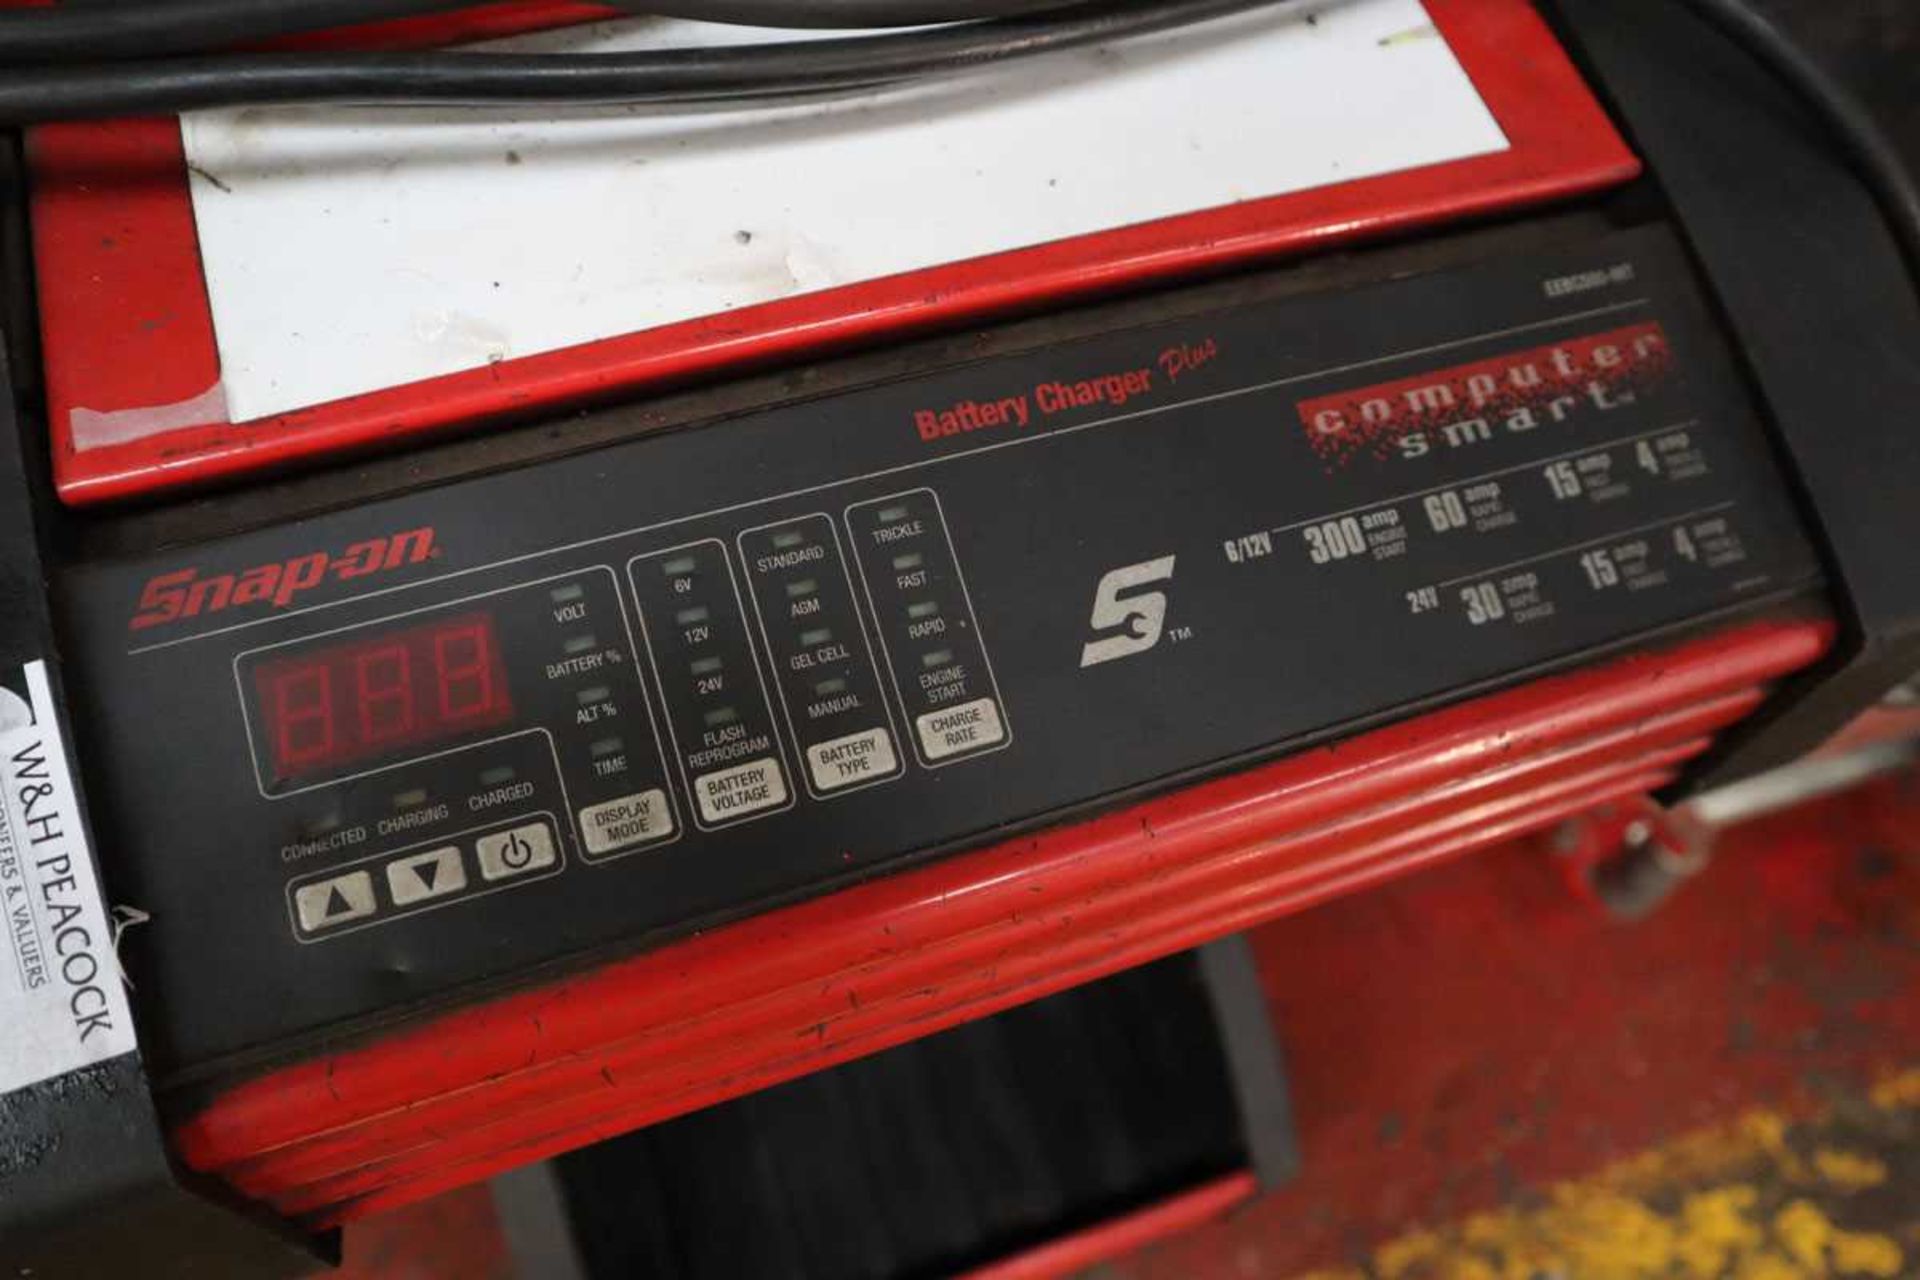 +VAT Snap on battery charger plus model: EEBC500-INT battery charging station - Image 2 of 2